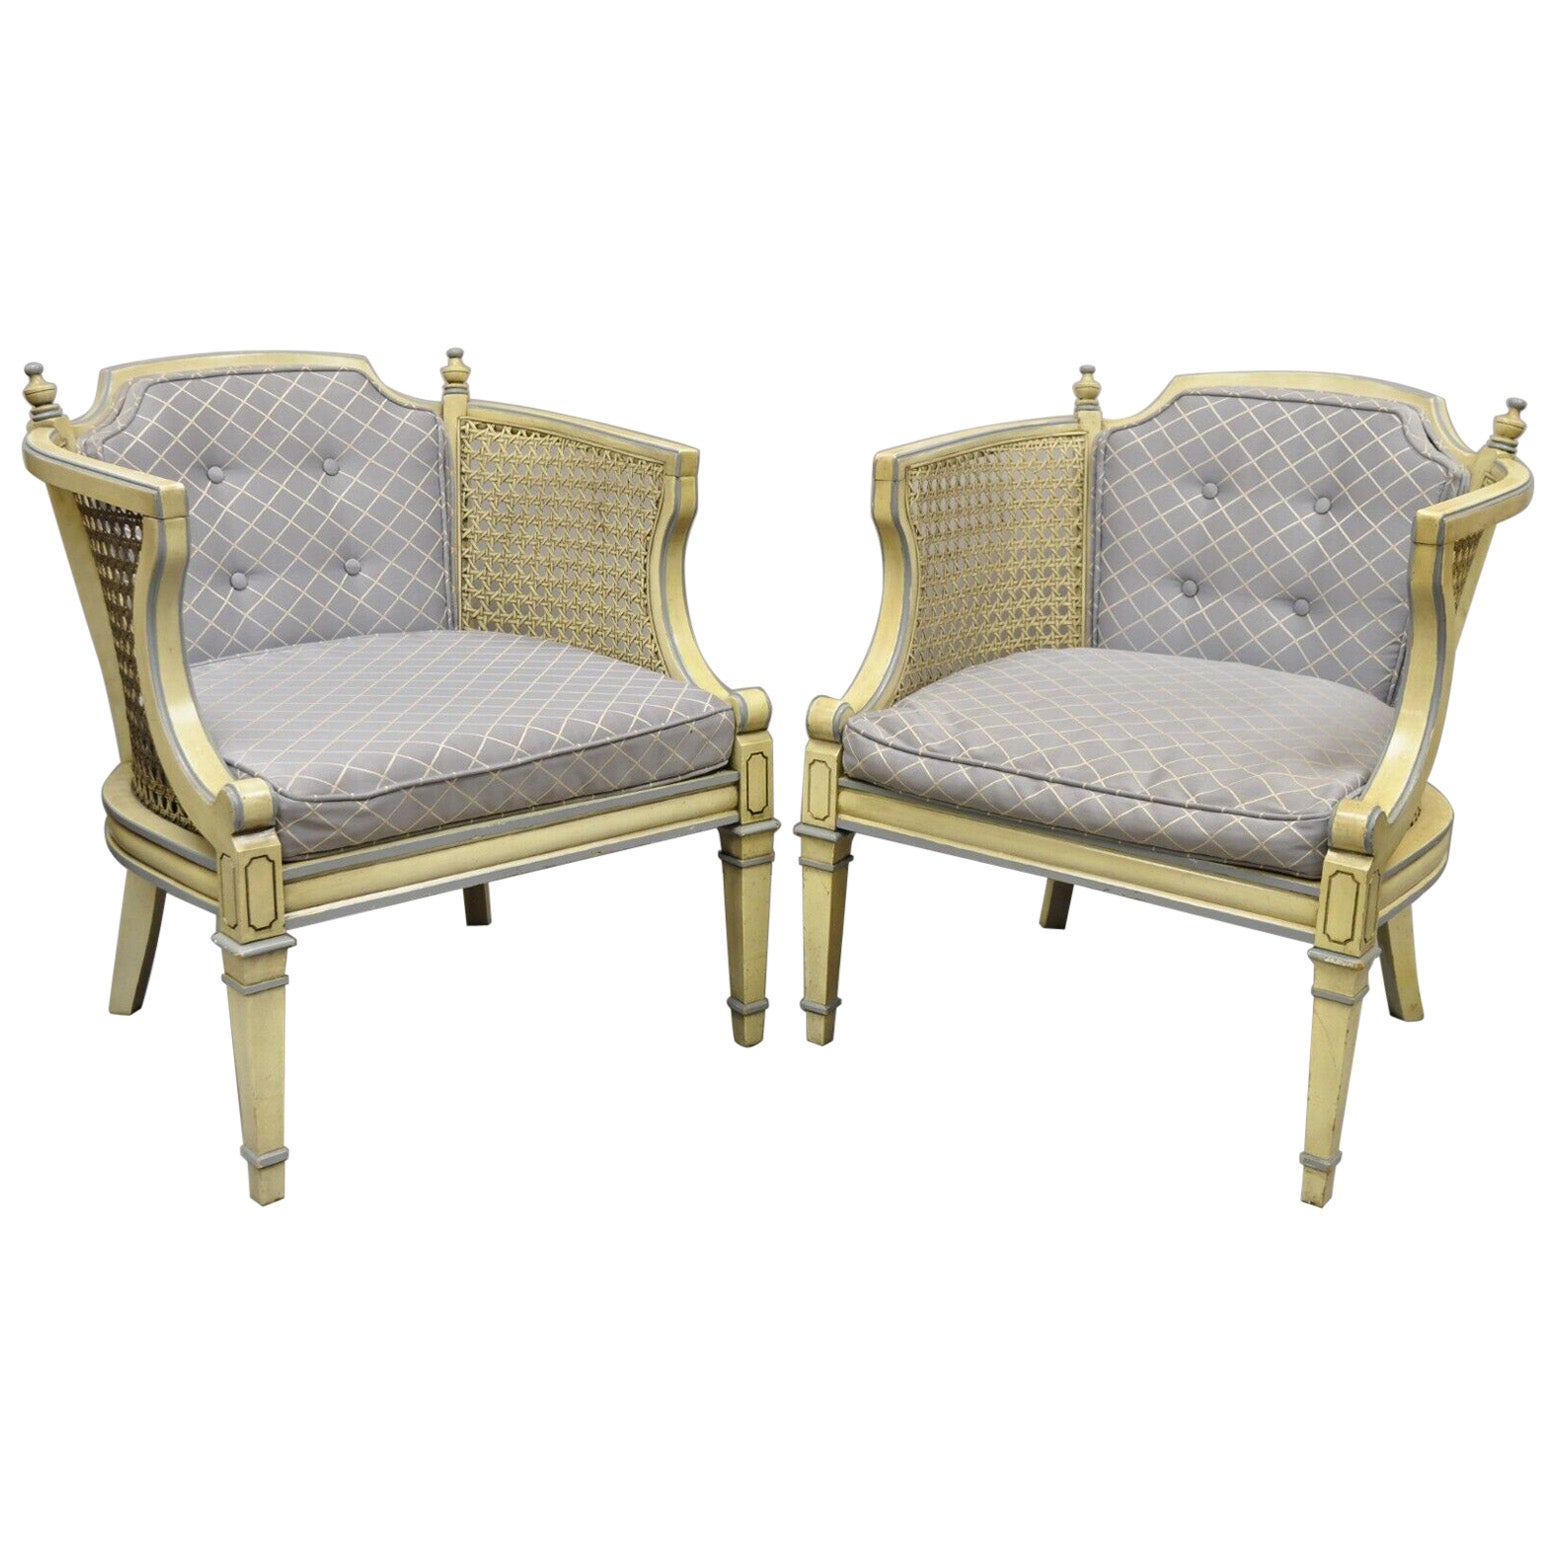 Vintage Hollywood Regency Cream Painted Cane Side Club Lounge Chairs, Pair